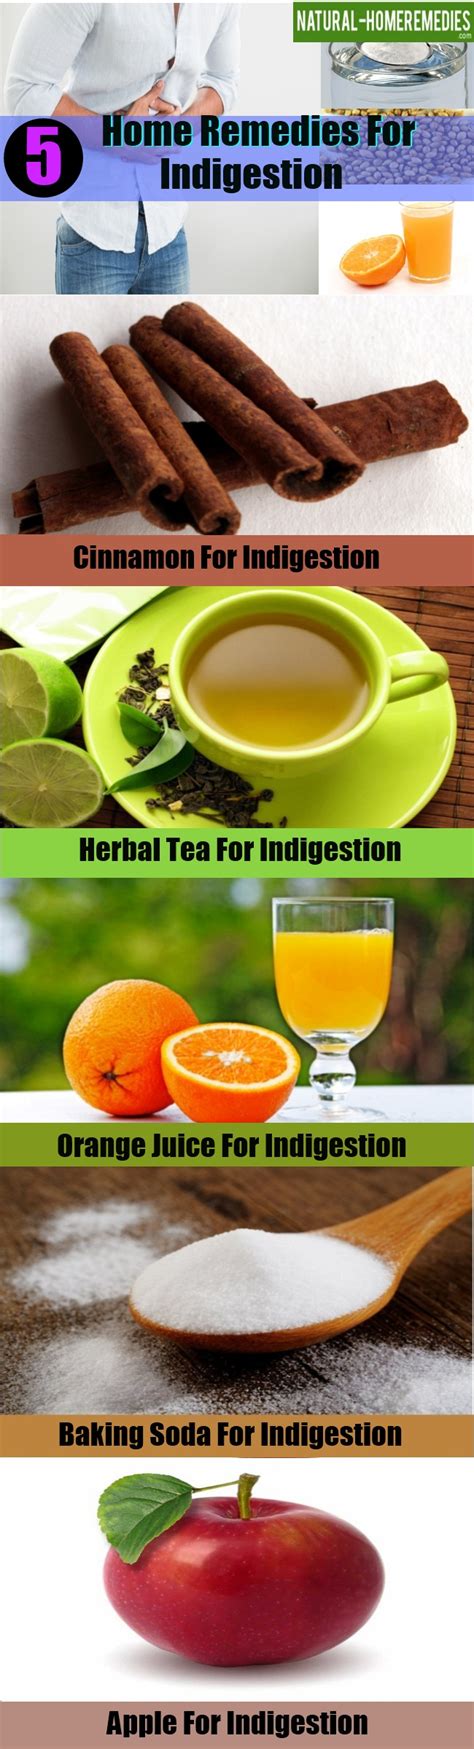 Top 5 Home Remedies For Indigestion Natural Home Remedies And Supplements